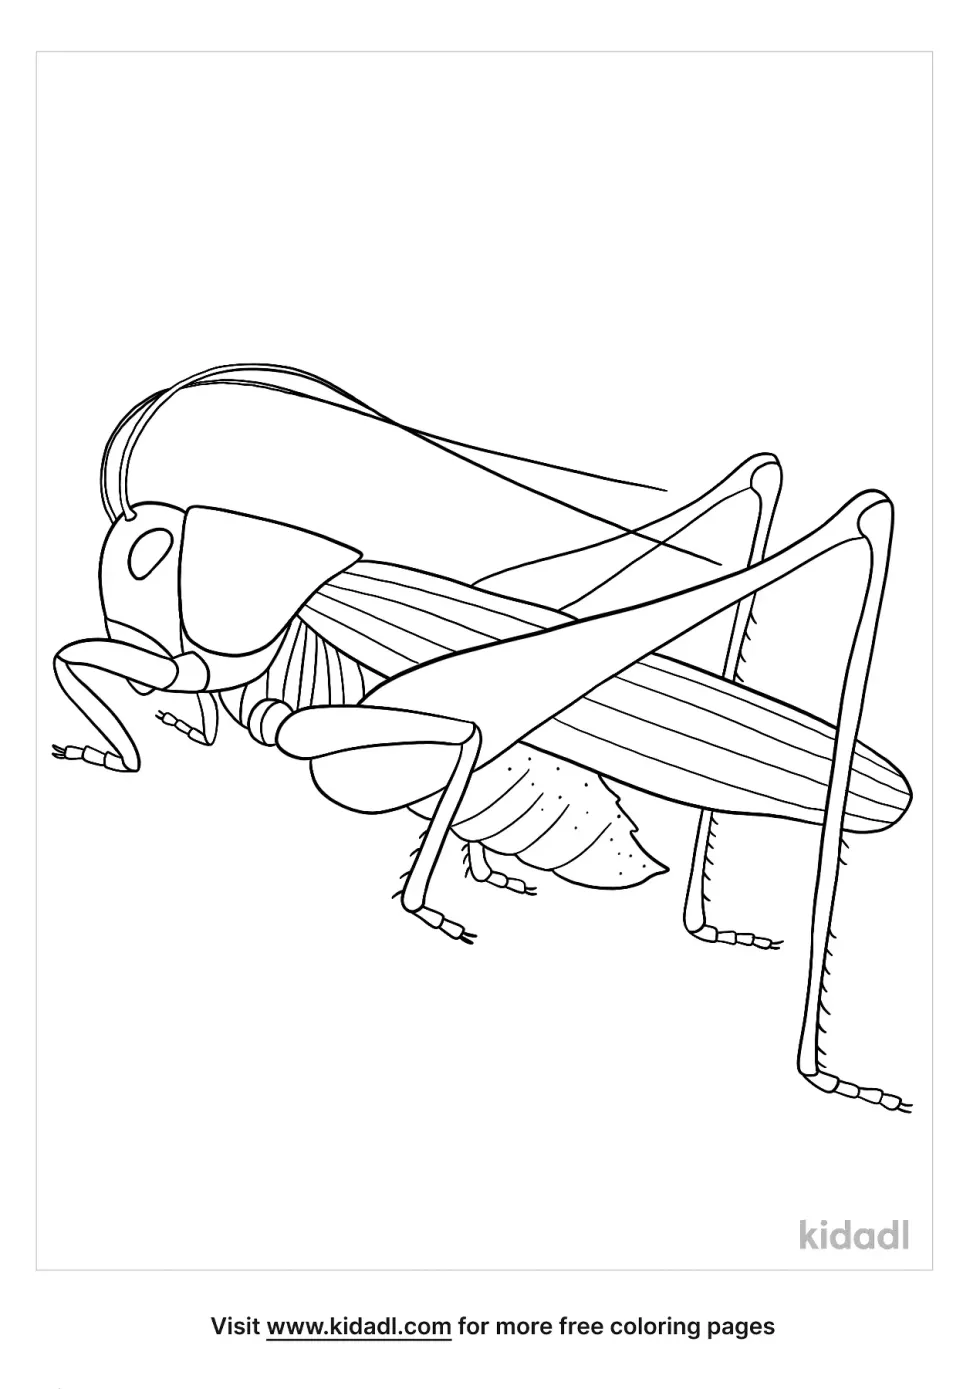 Locust Coloring Page